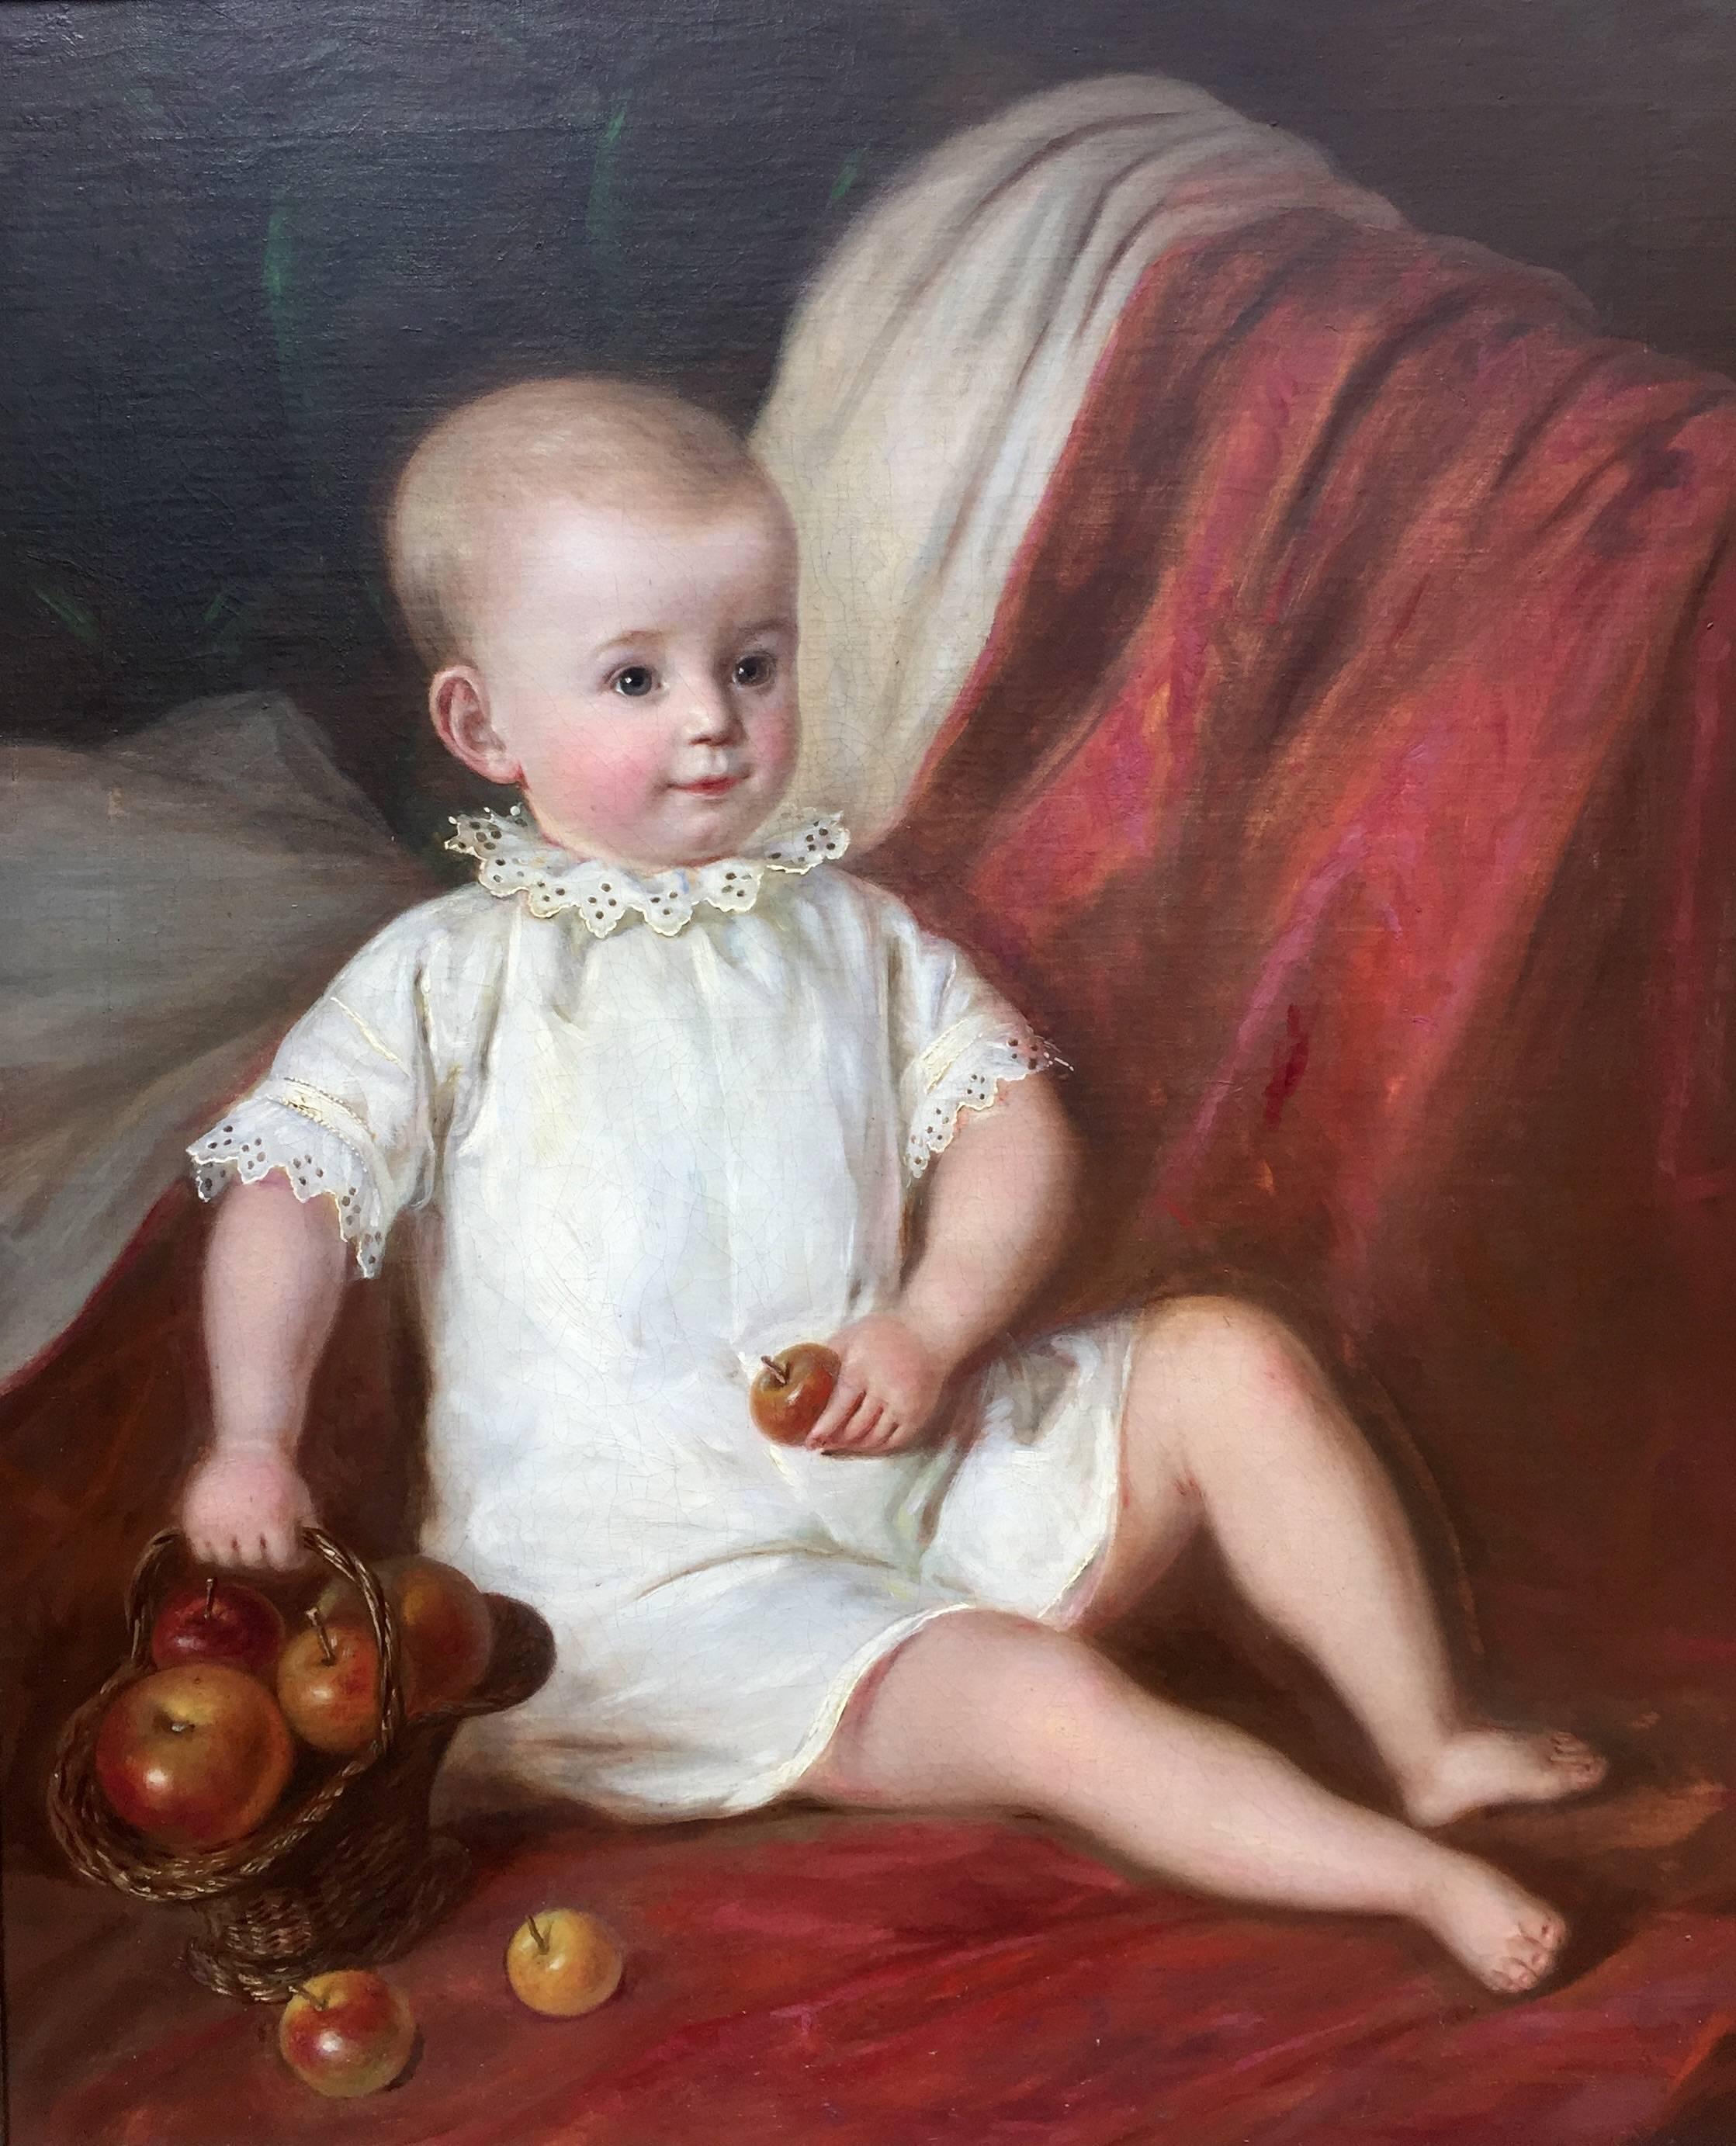 baby holding an apple